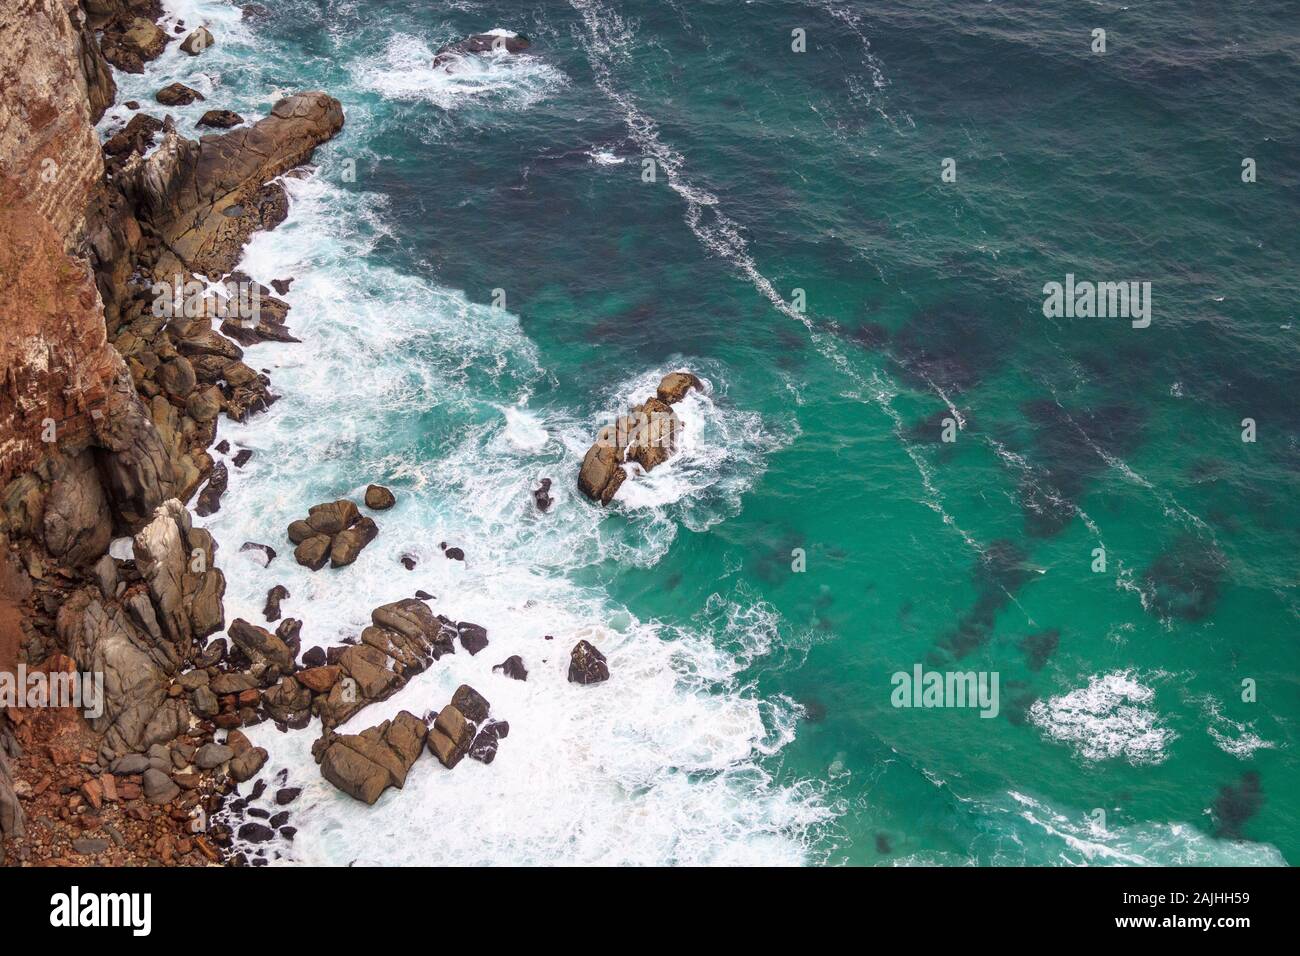 Aerial view of the turquoise sea crashing against steep cliffs, Cape of Good Hope, South Africa Stock Photo